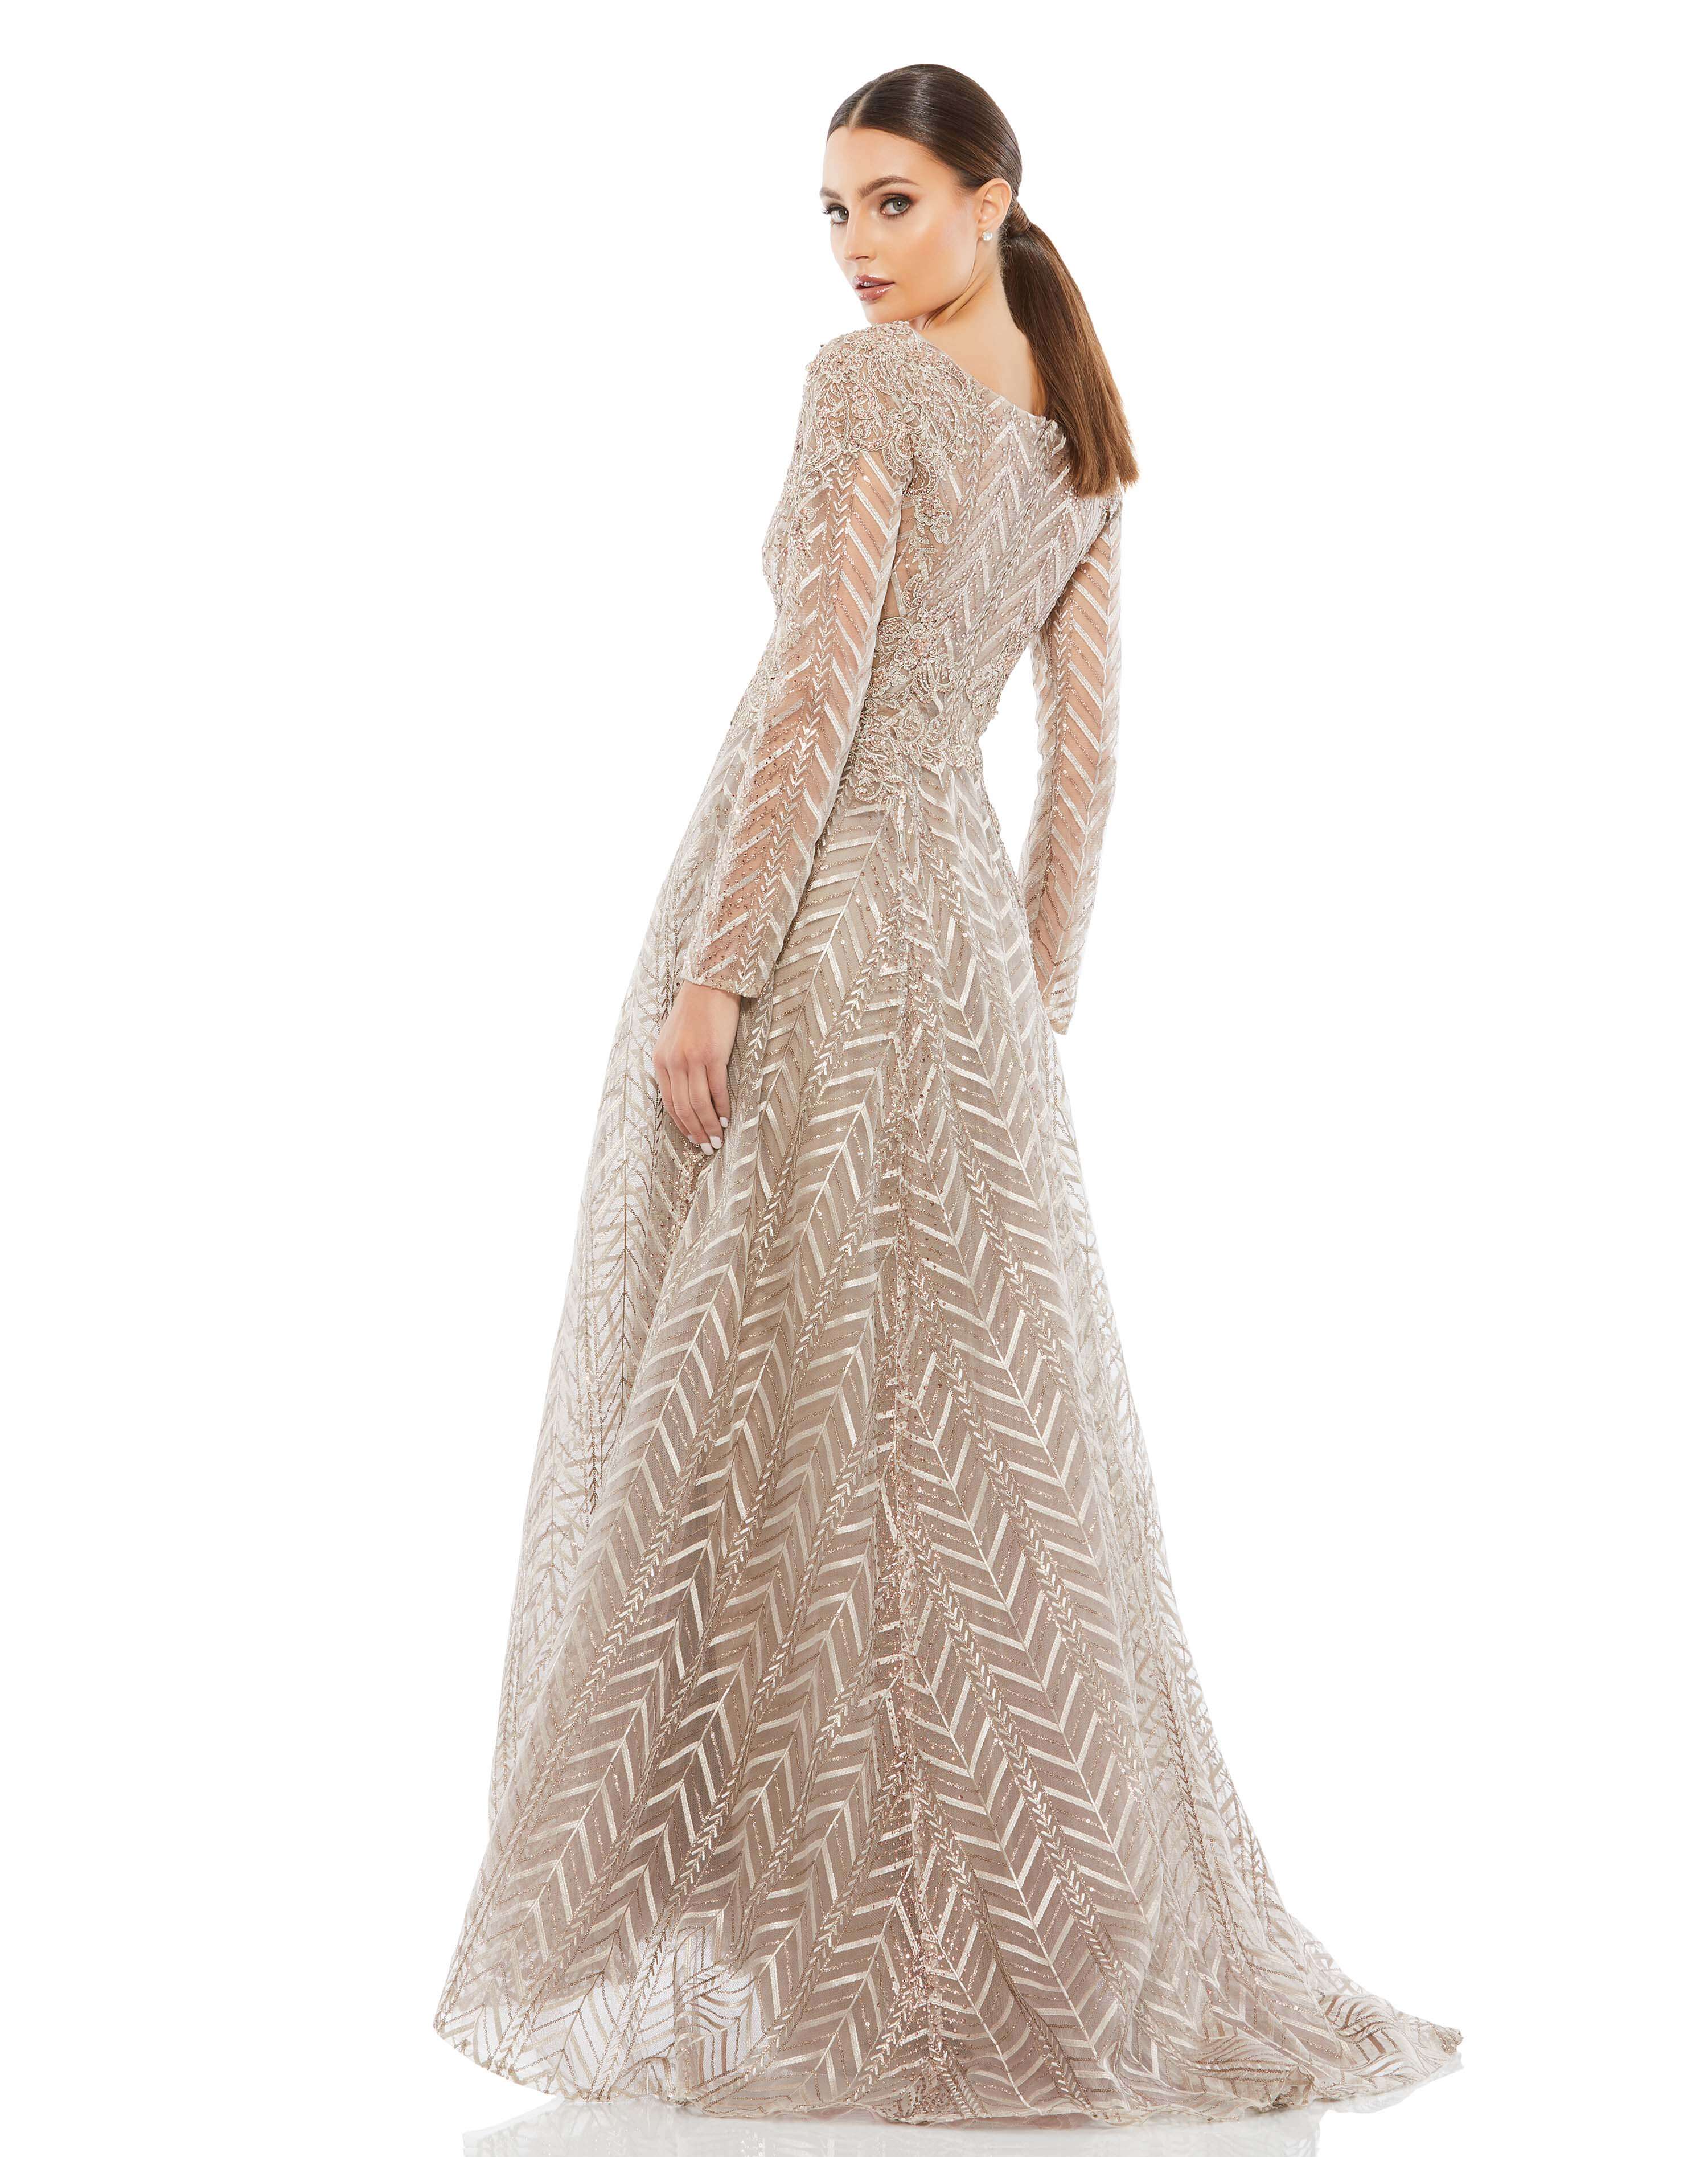 Embellished Illusion Long Sleeve Wrap Over A Line Gown